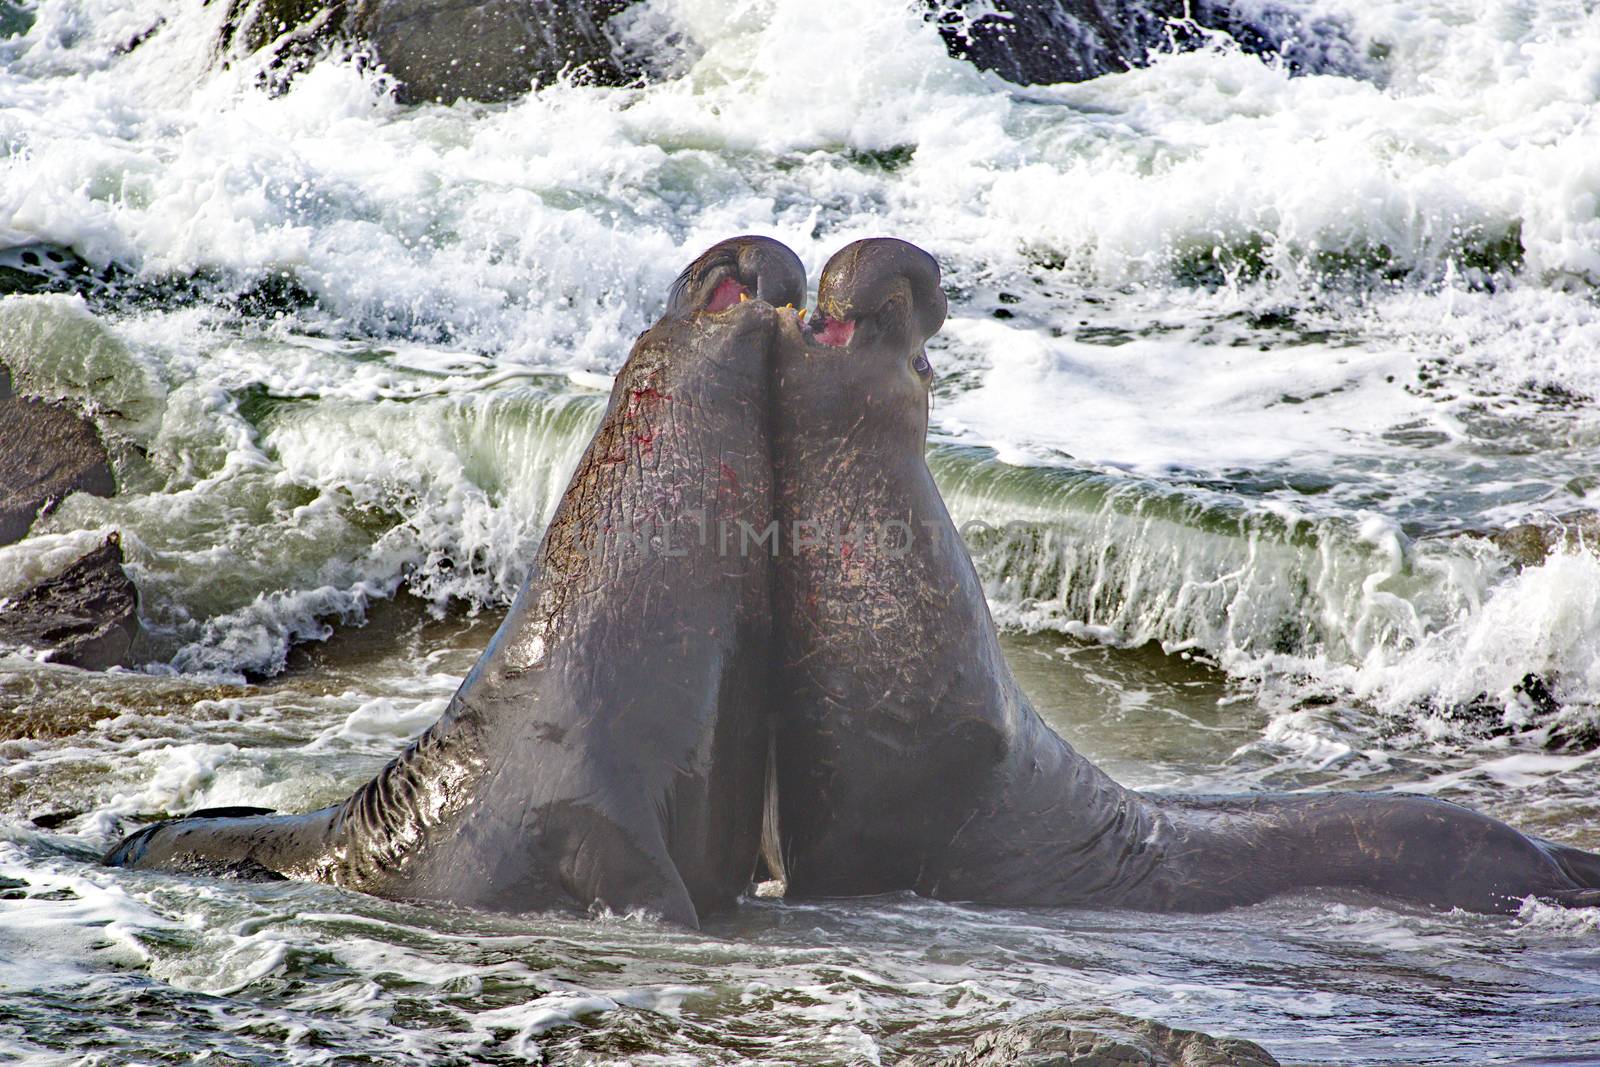 Two, bull northern elephant seals bellow and battle in Pacific Ocean surf.  Location is Piedras Blancas Elephant Seal Rookery near San Simeon and Cambria in California. 